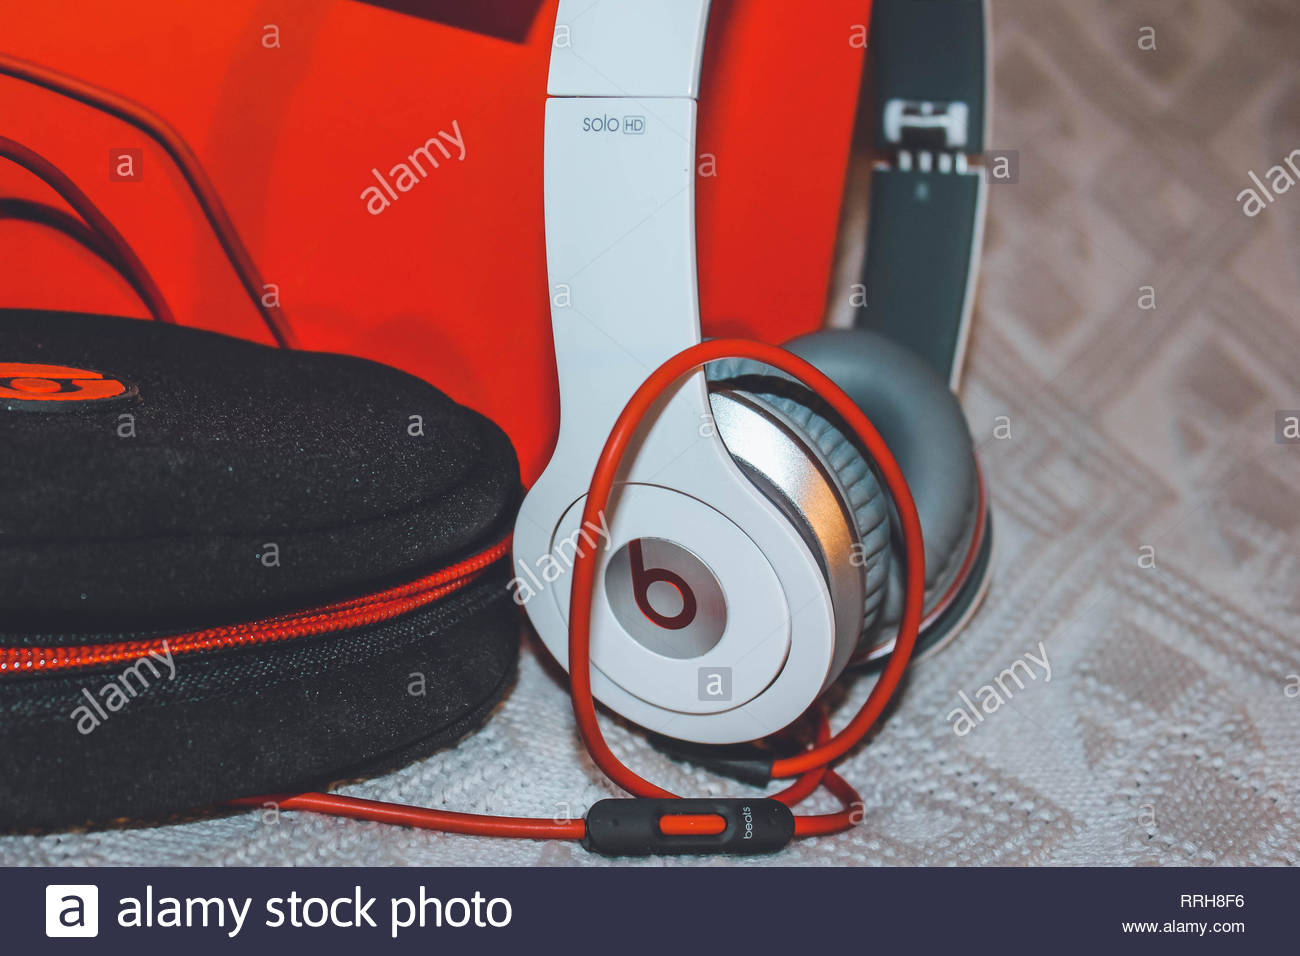 beats by dre stock